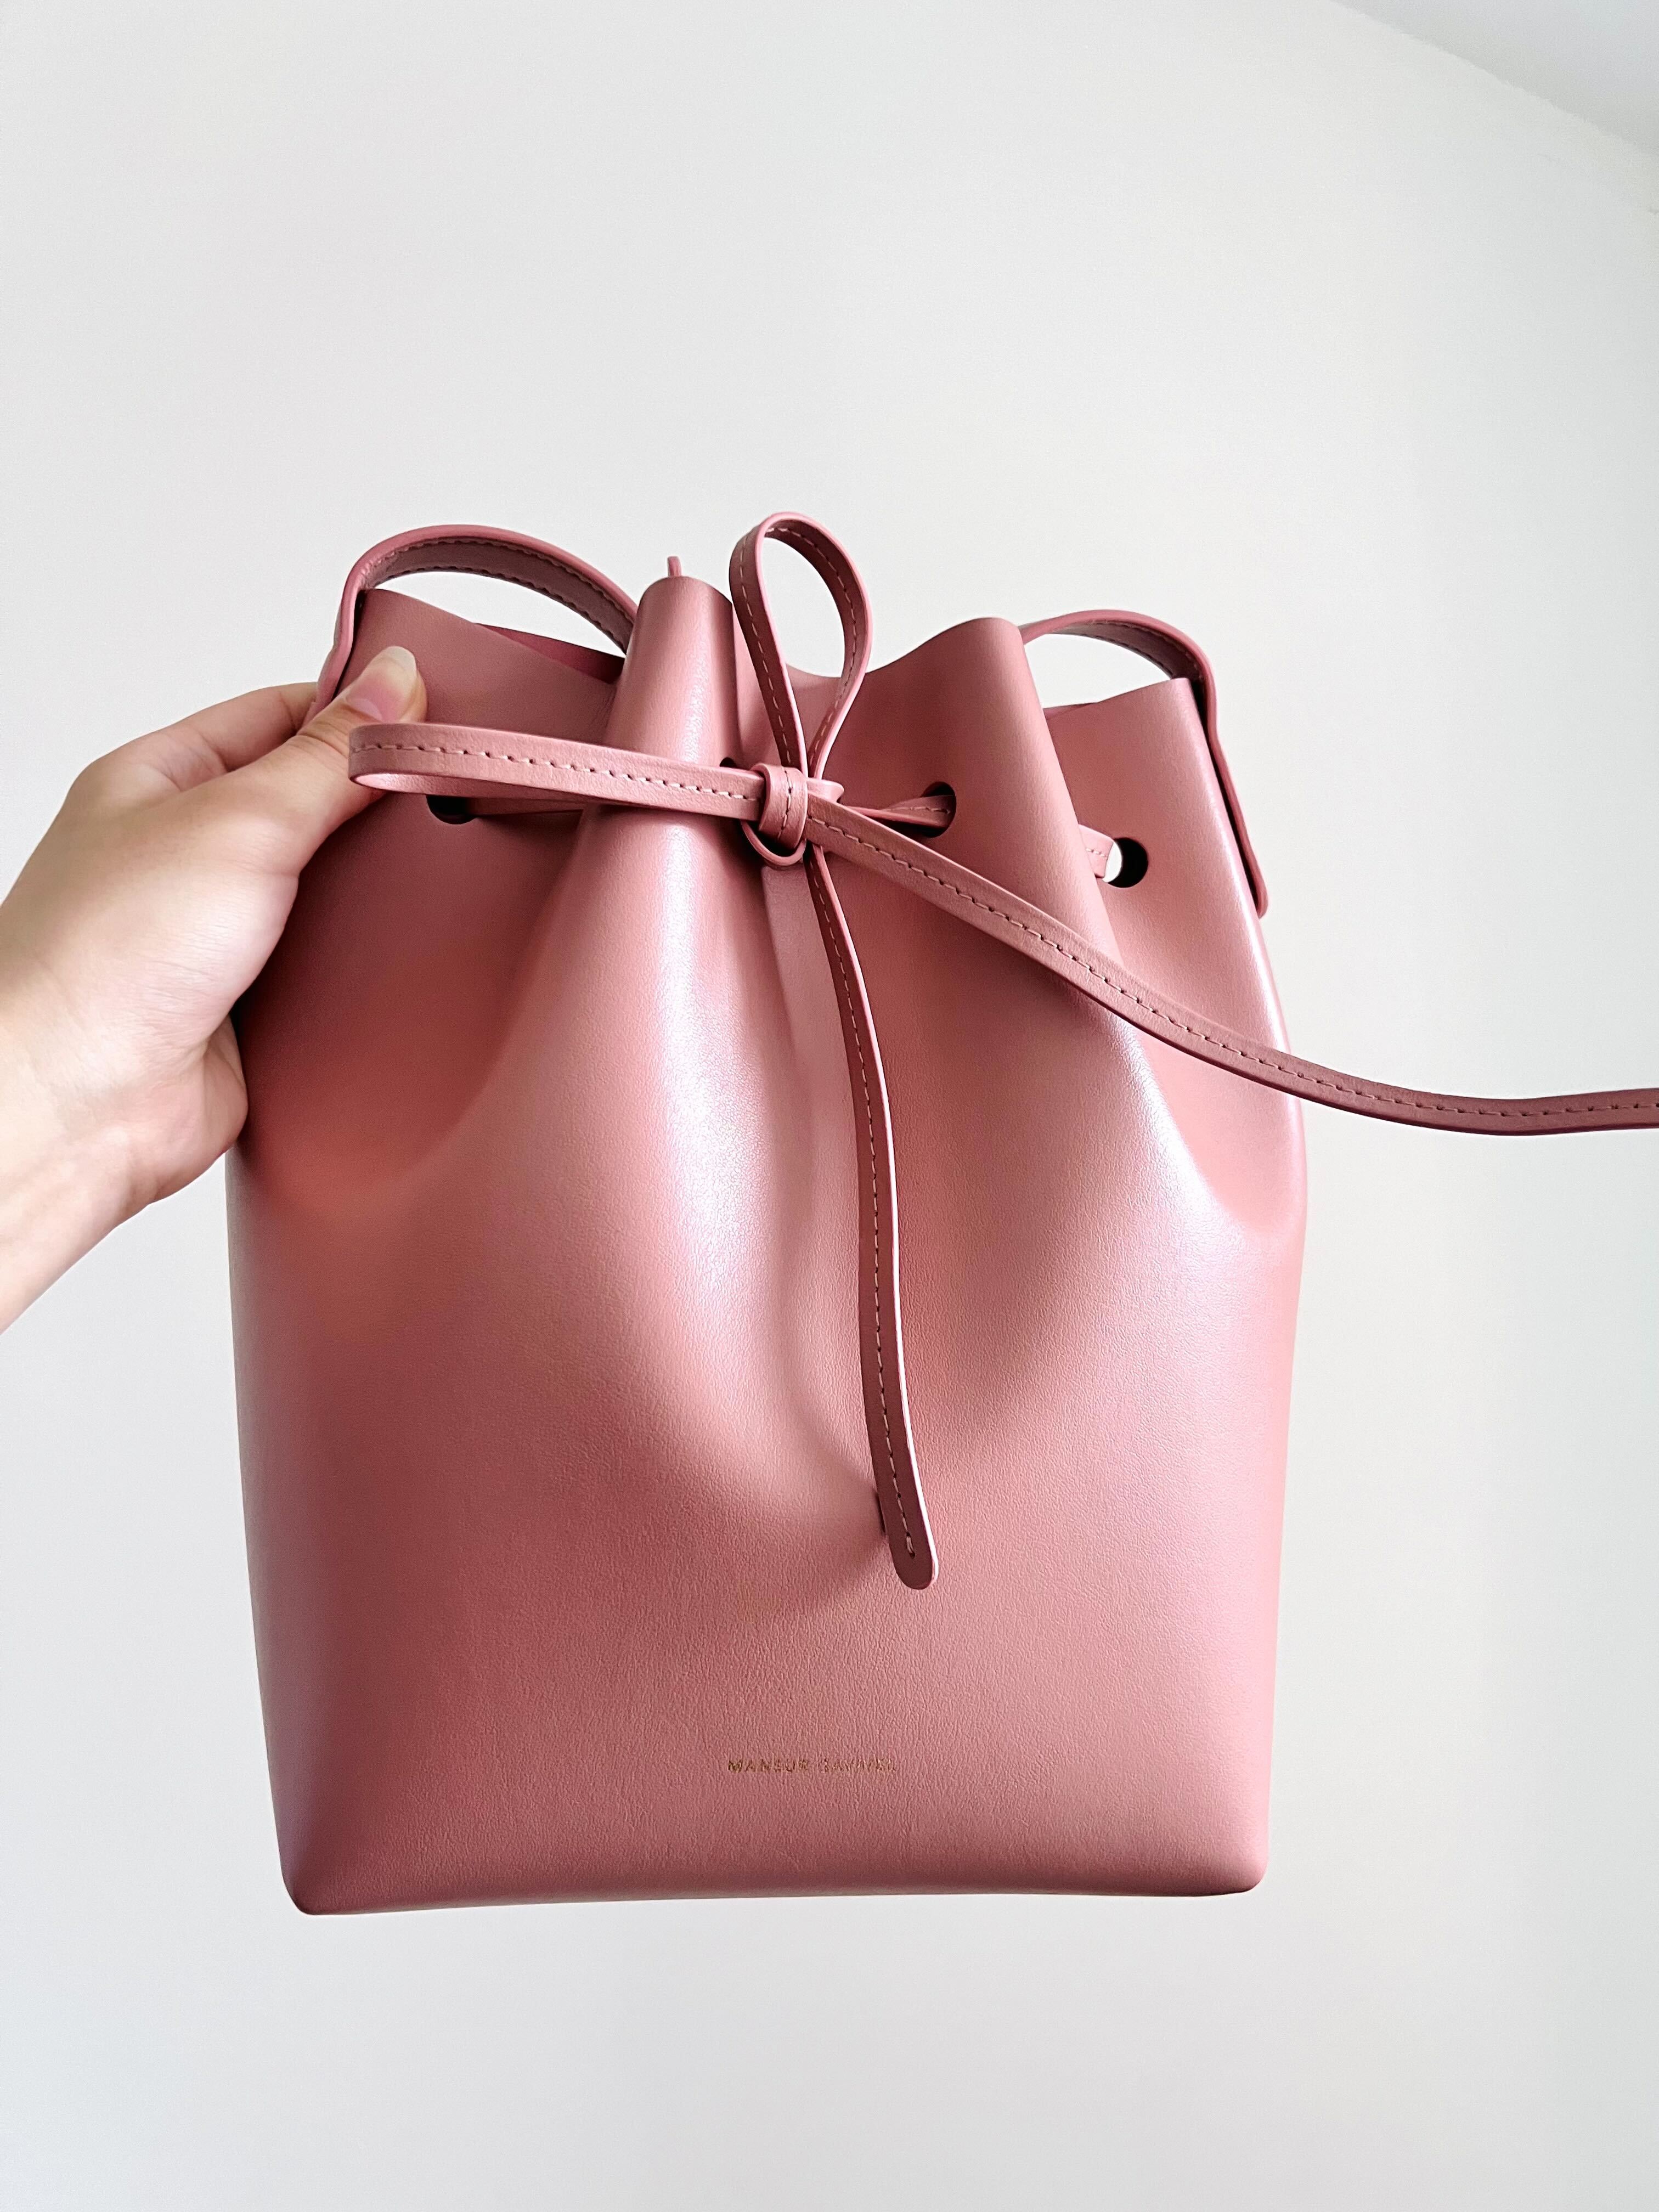 Cause Travel With Kids Is WAR, This Mansur Gavriel Bag Is Your